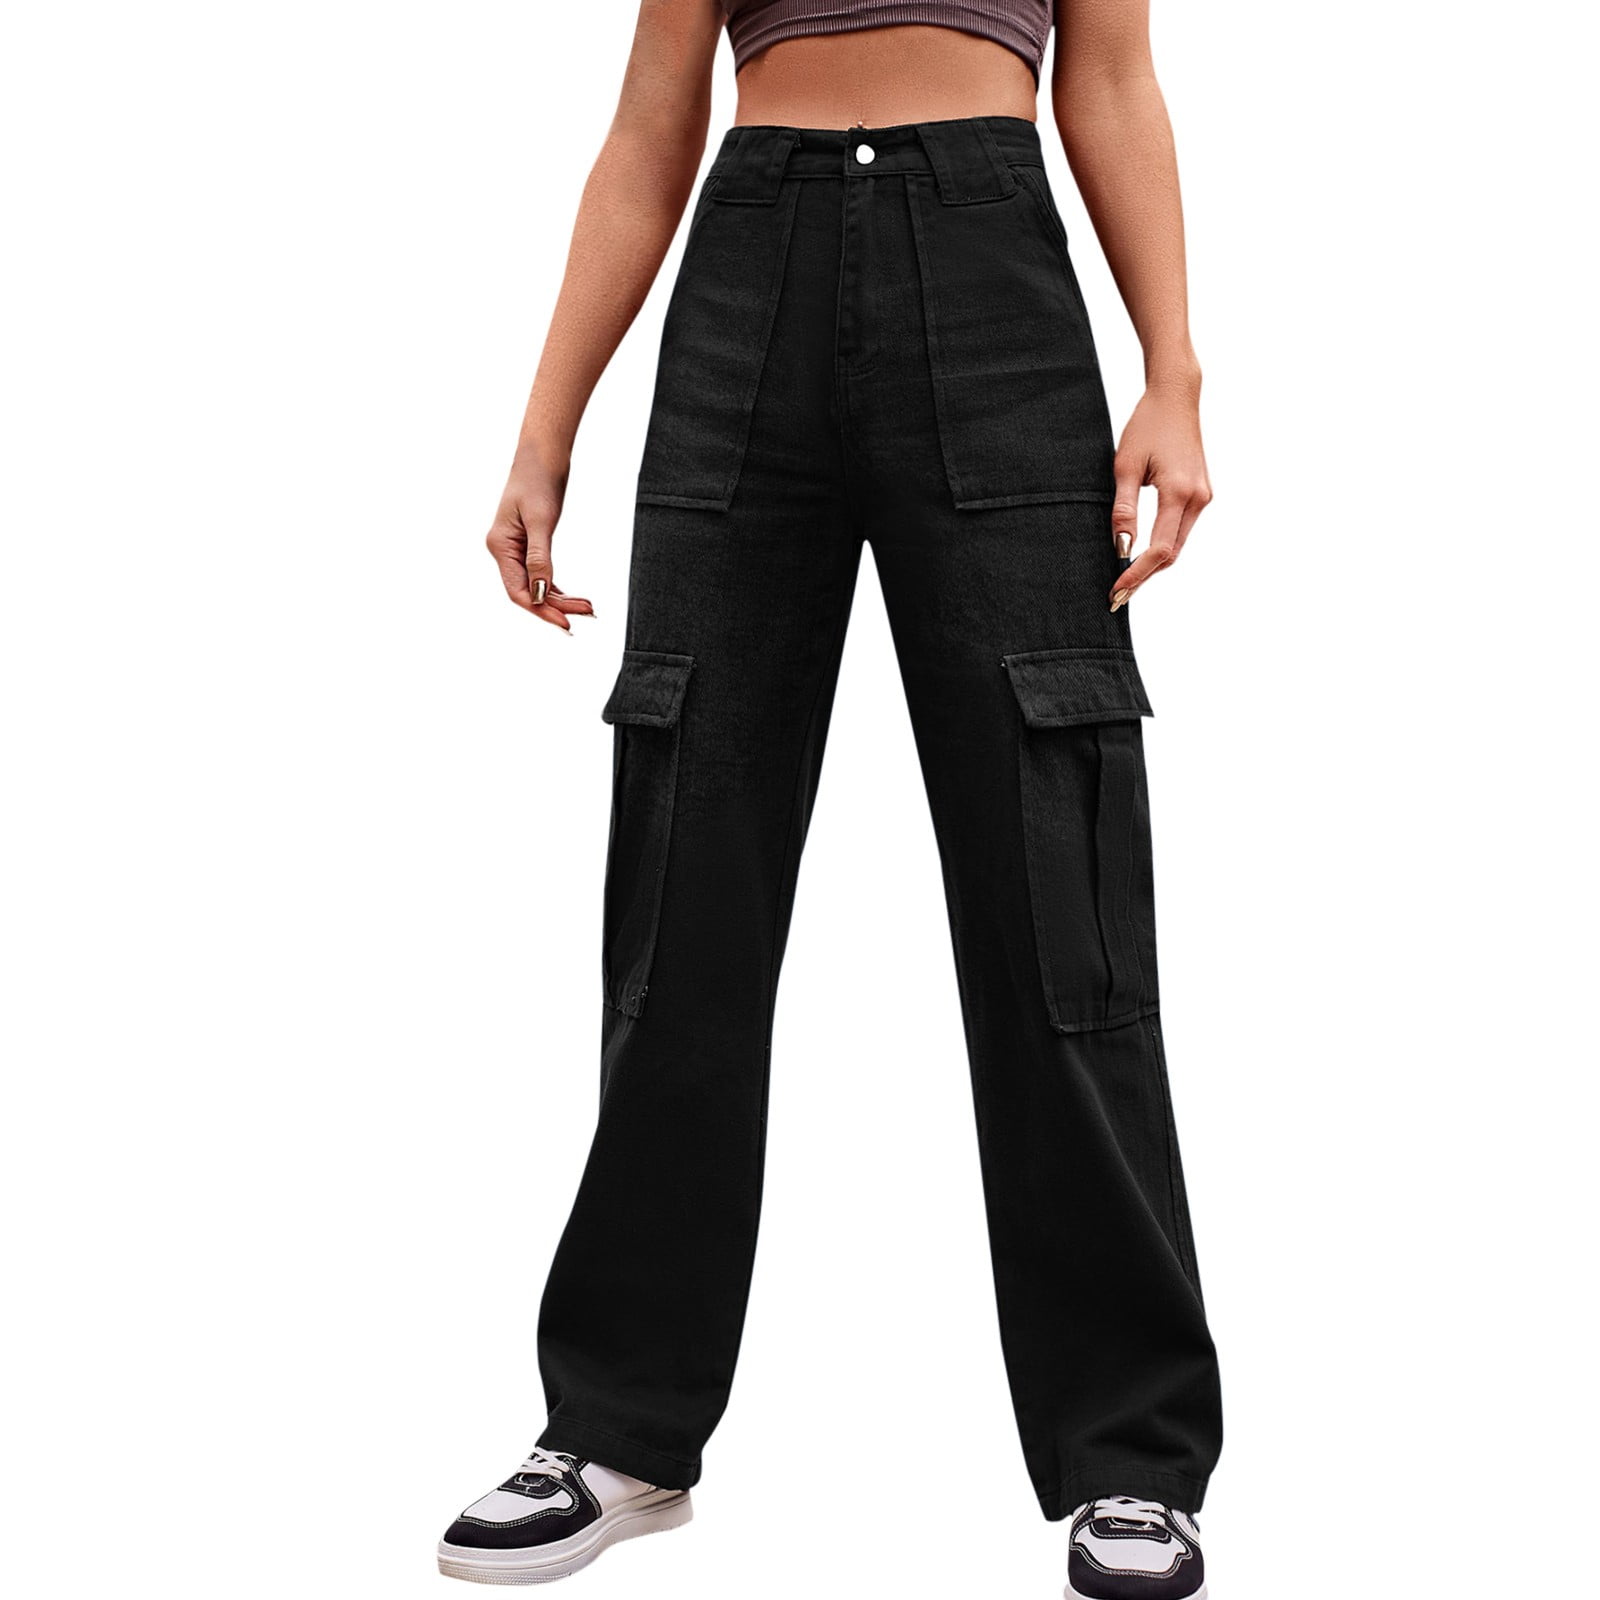 Designer Multi Pocket Track Pants For Men And Women Casual Cargo Harem Side Pocket  Trousers With Elastic Waist Fashionable Hip Hop Sportswear Asian 224F From  Yncwe, $36.75 | DHgate.Com